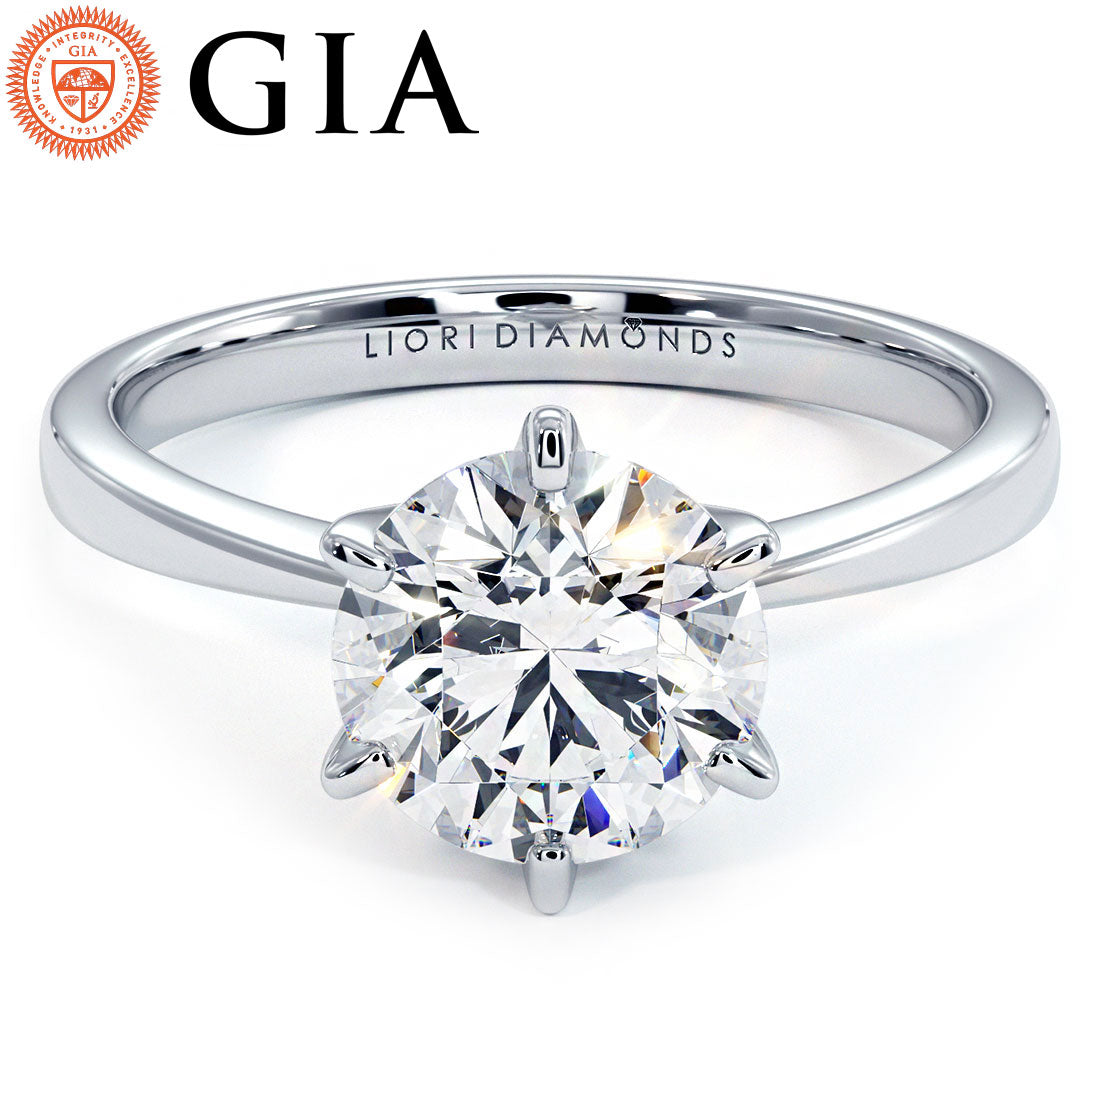 1.51ct GIA Certified Round Brilliant Petite Tapered 6 Prong Solitaire Lab Grown Diamond Engagement Ring set in Platinum